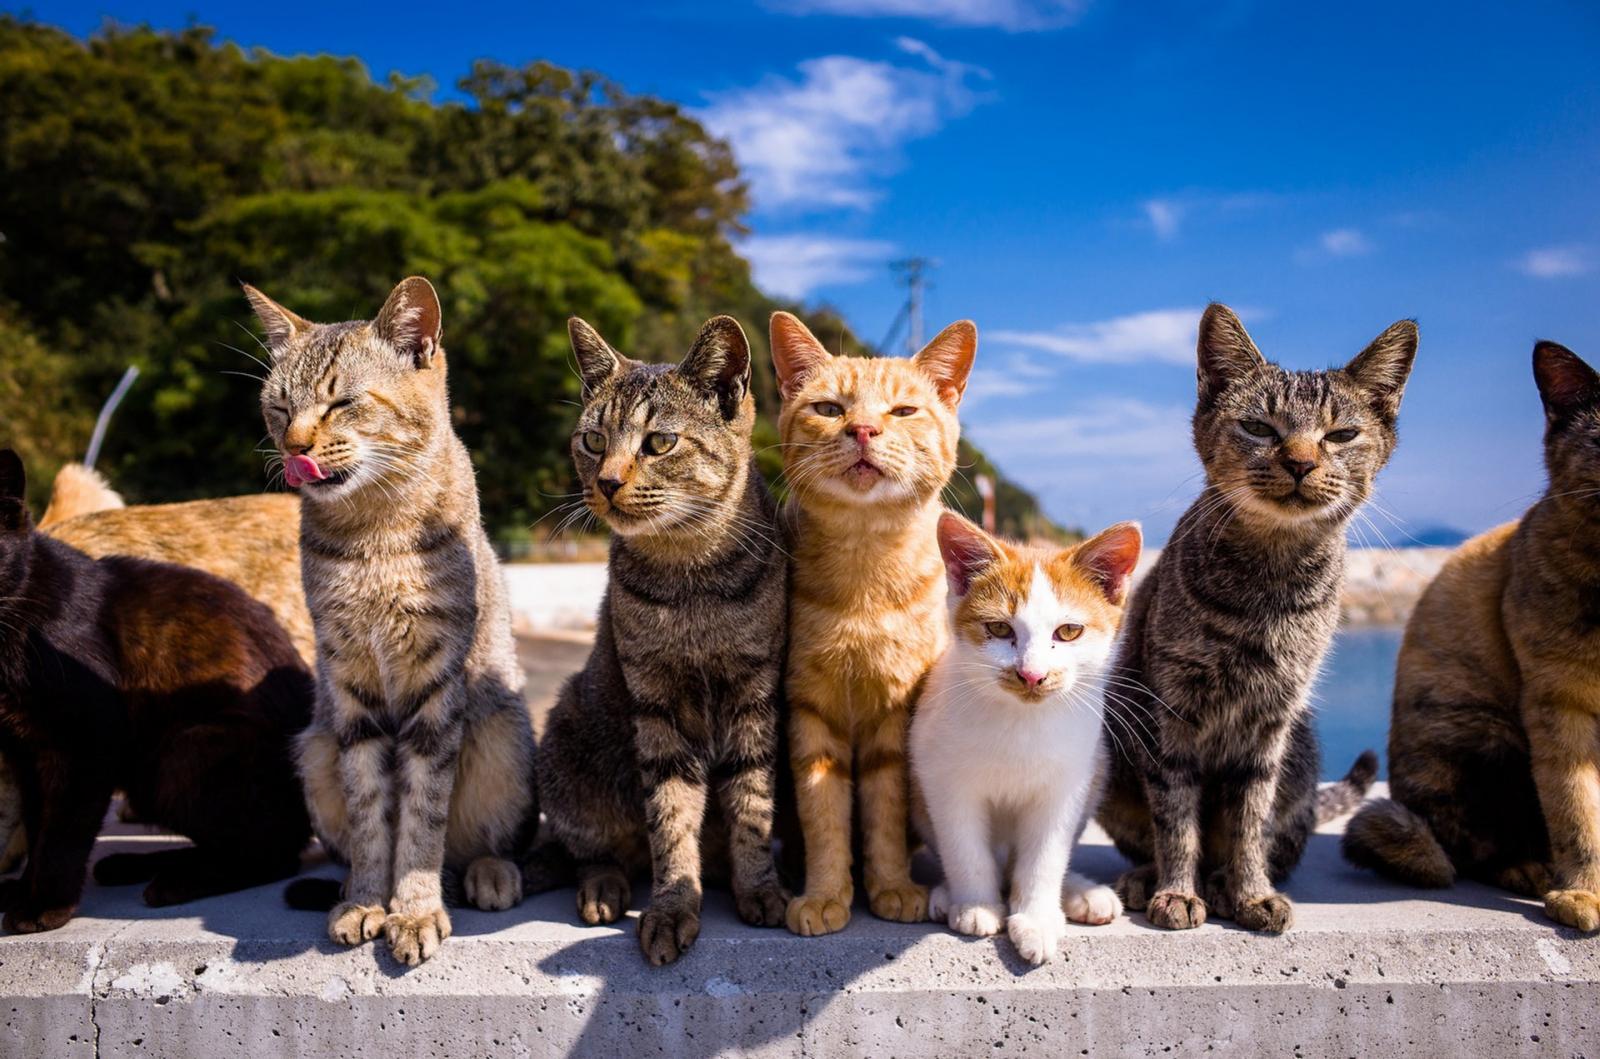 I Bet You Can’t Get 14/18 on This Geography Quiz Japan Aoshima Cat Island